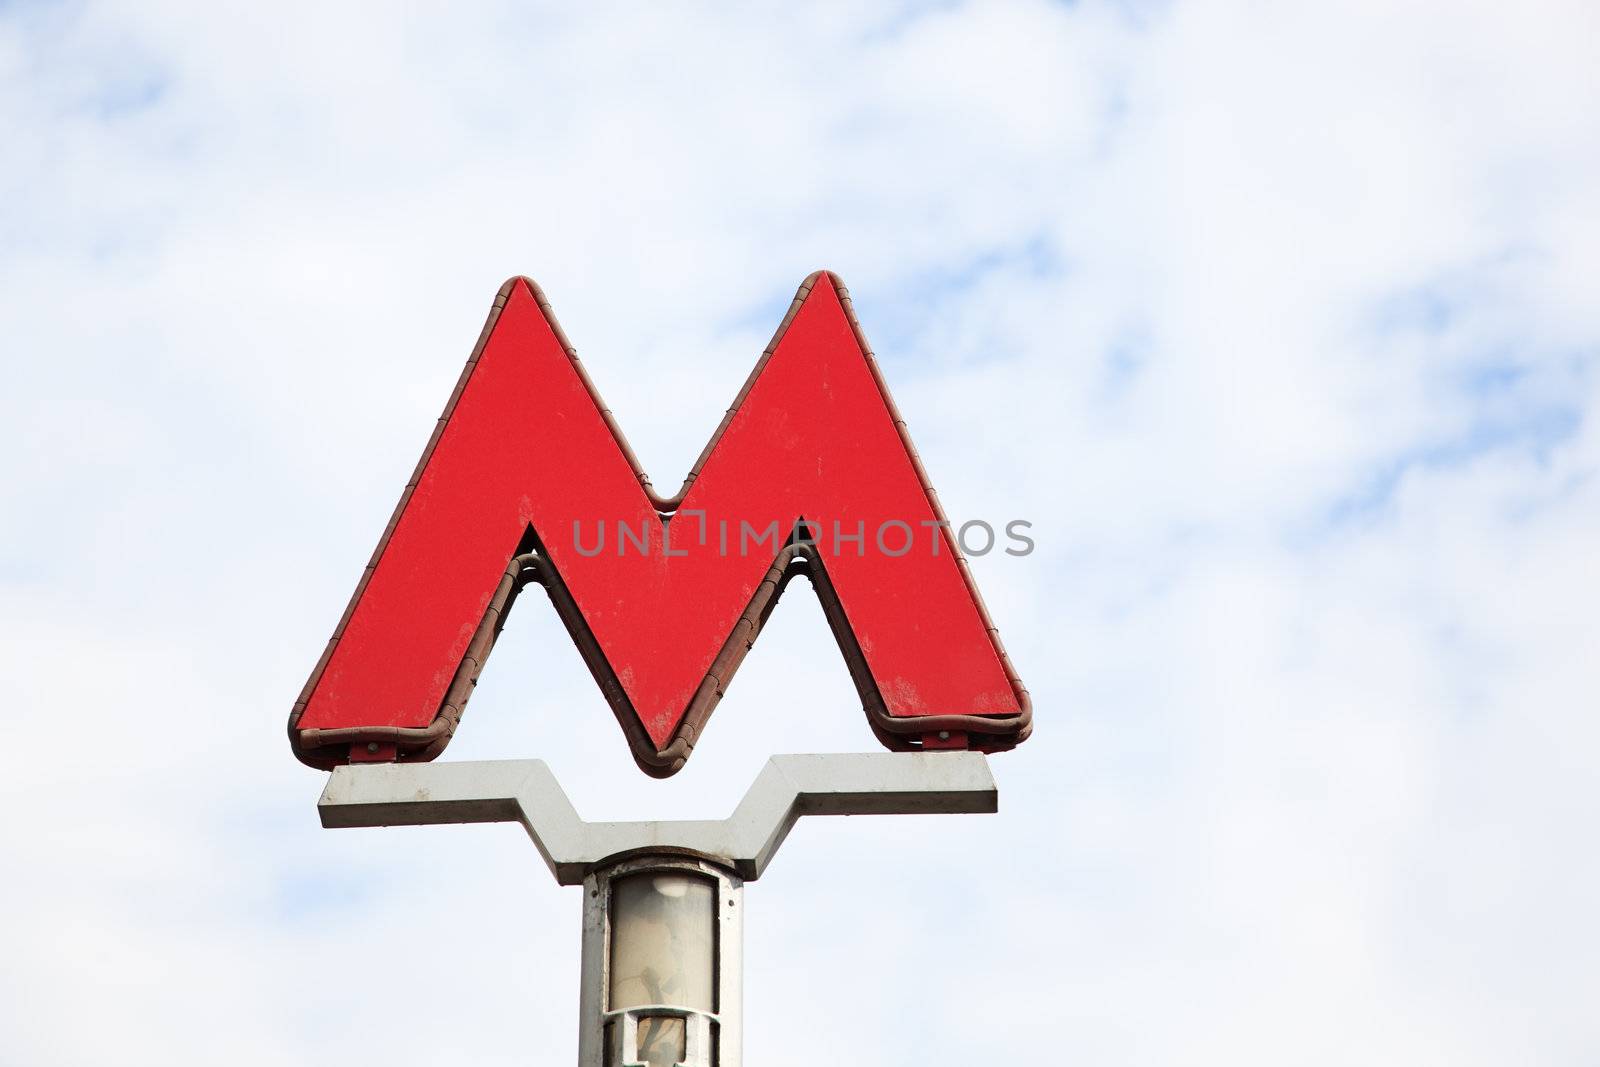 Moscow subway sign by Kuzma